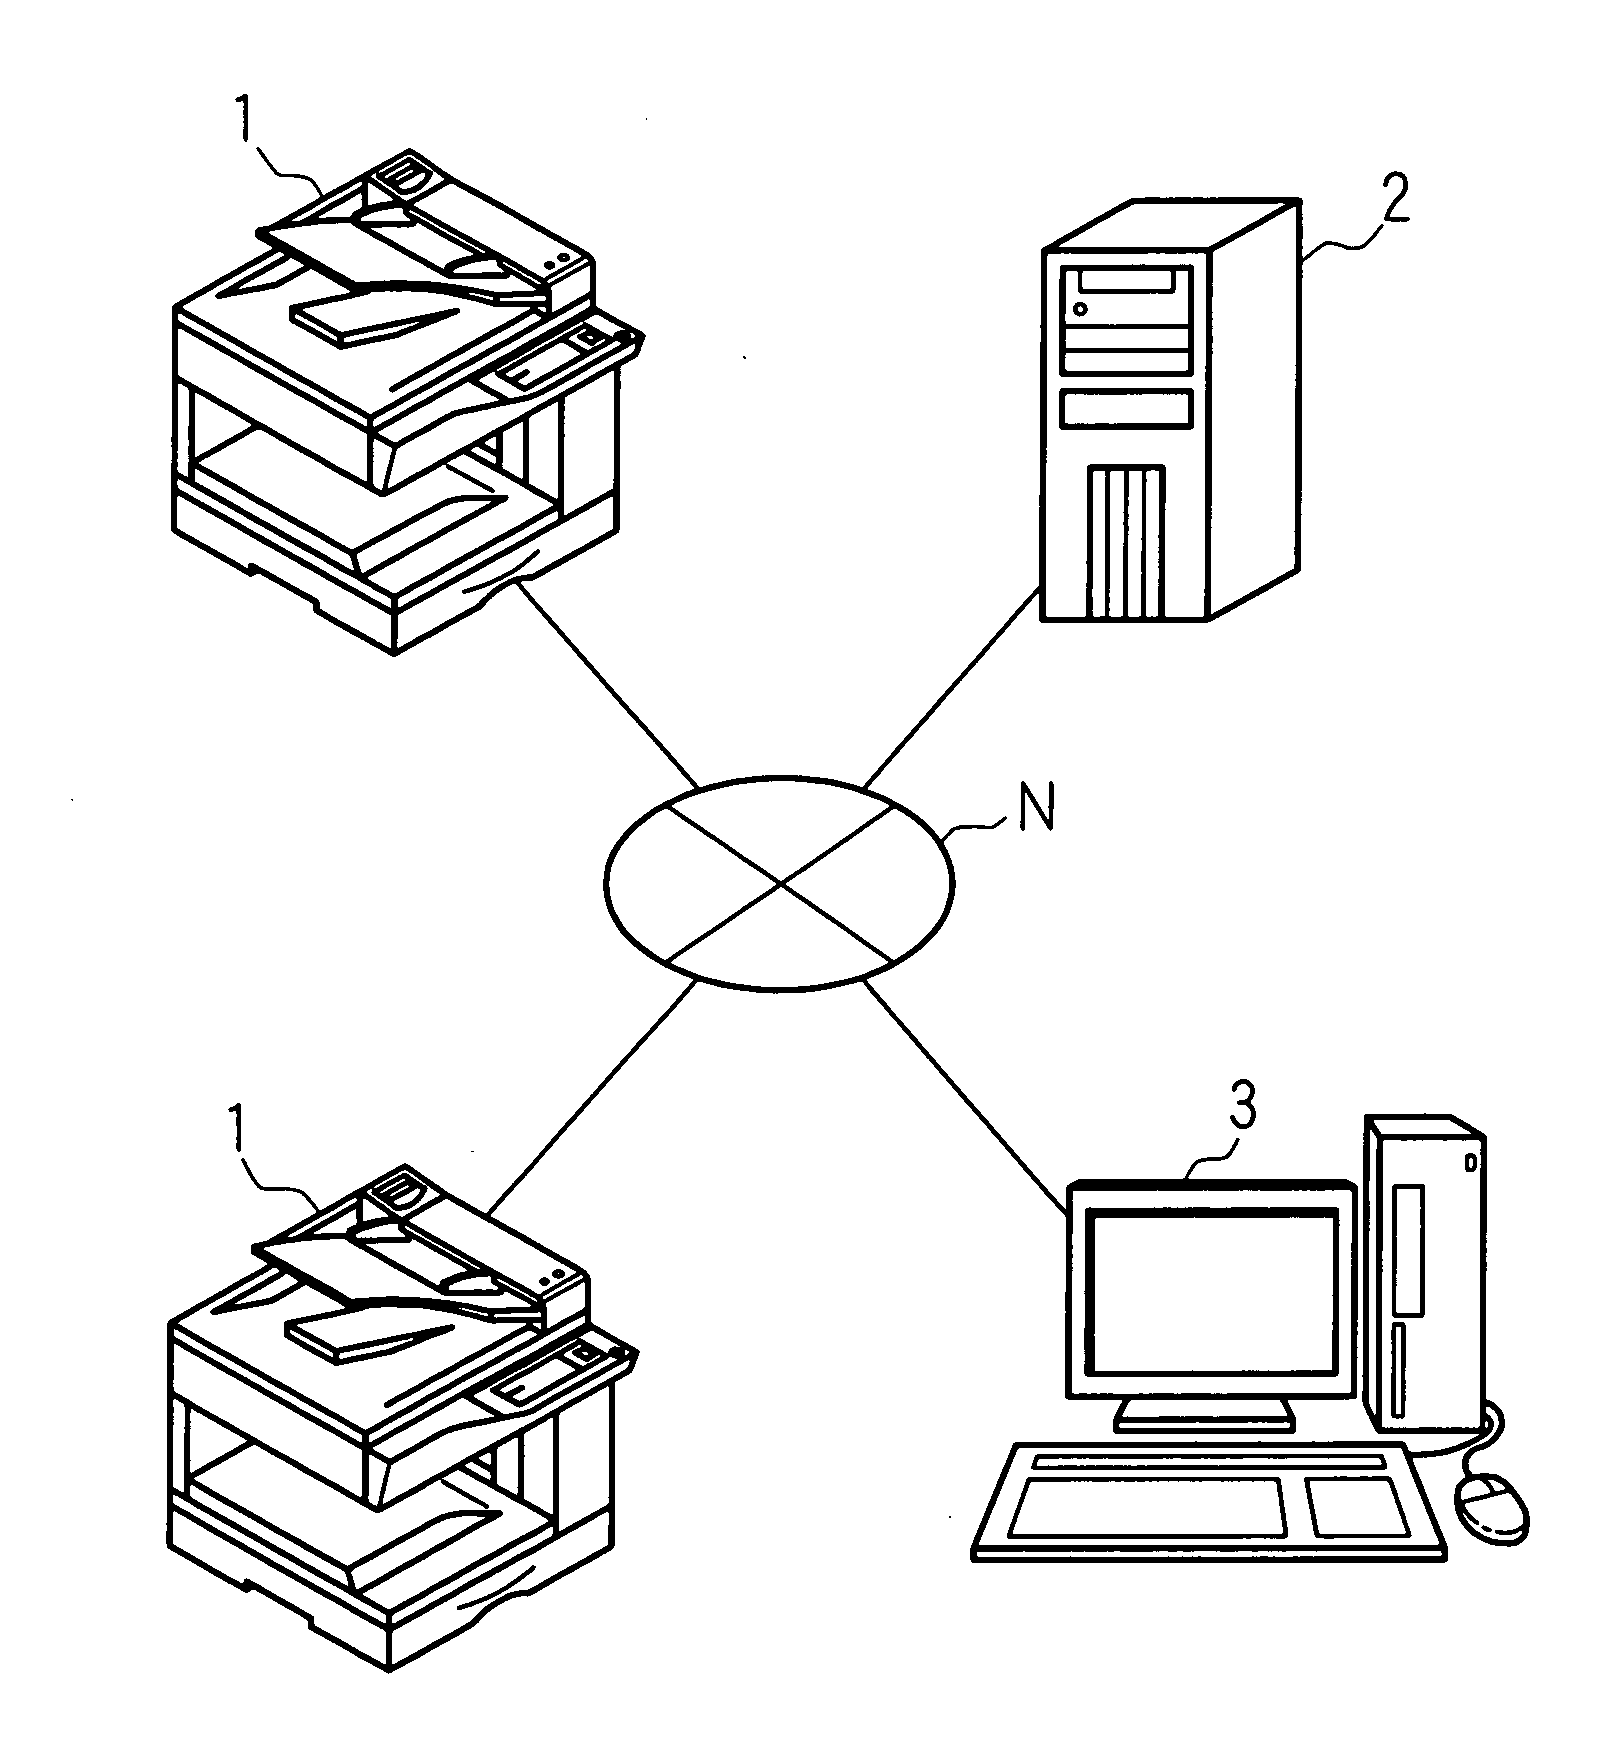 Image processing system, image processing apparatus and judgment apparatus